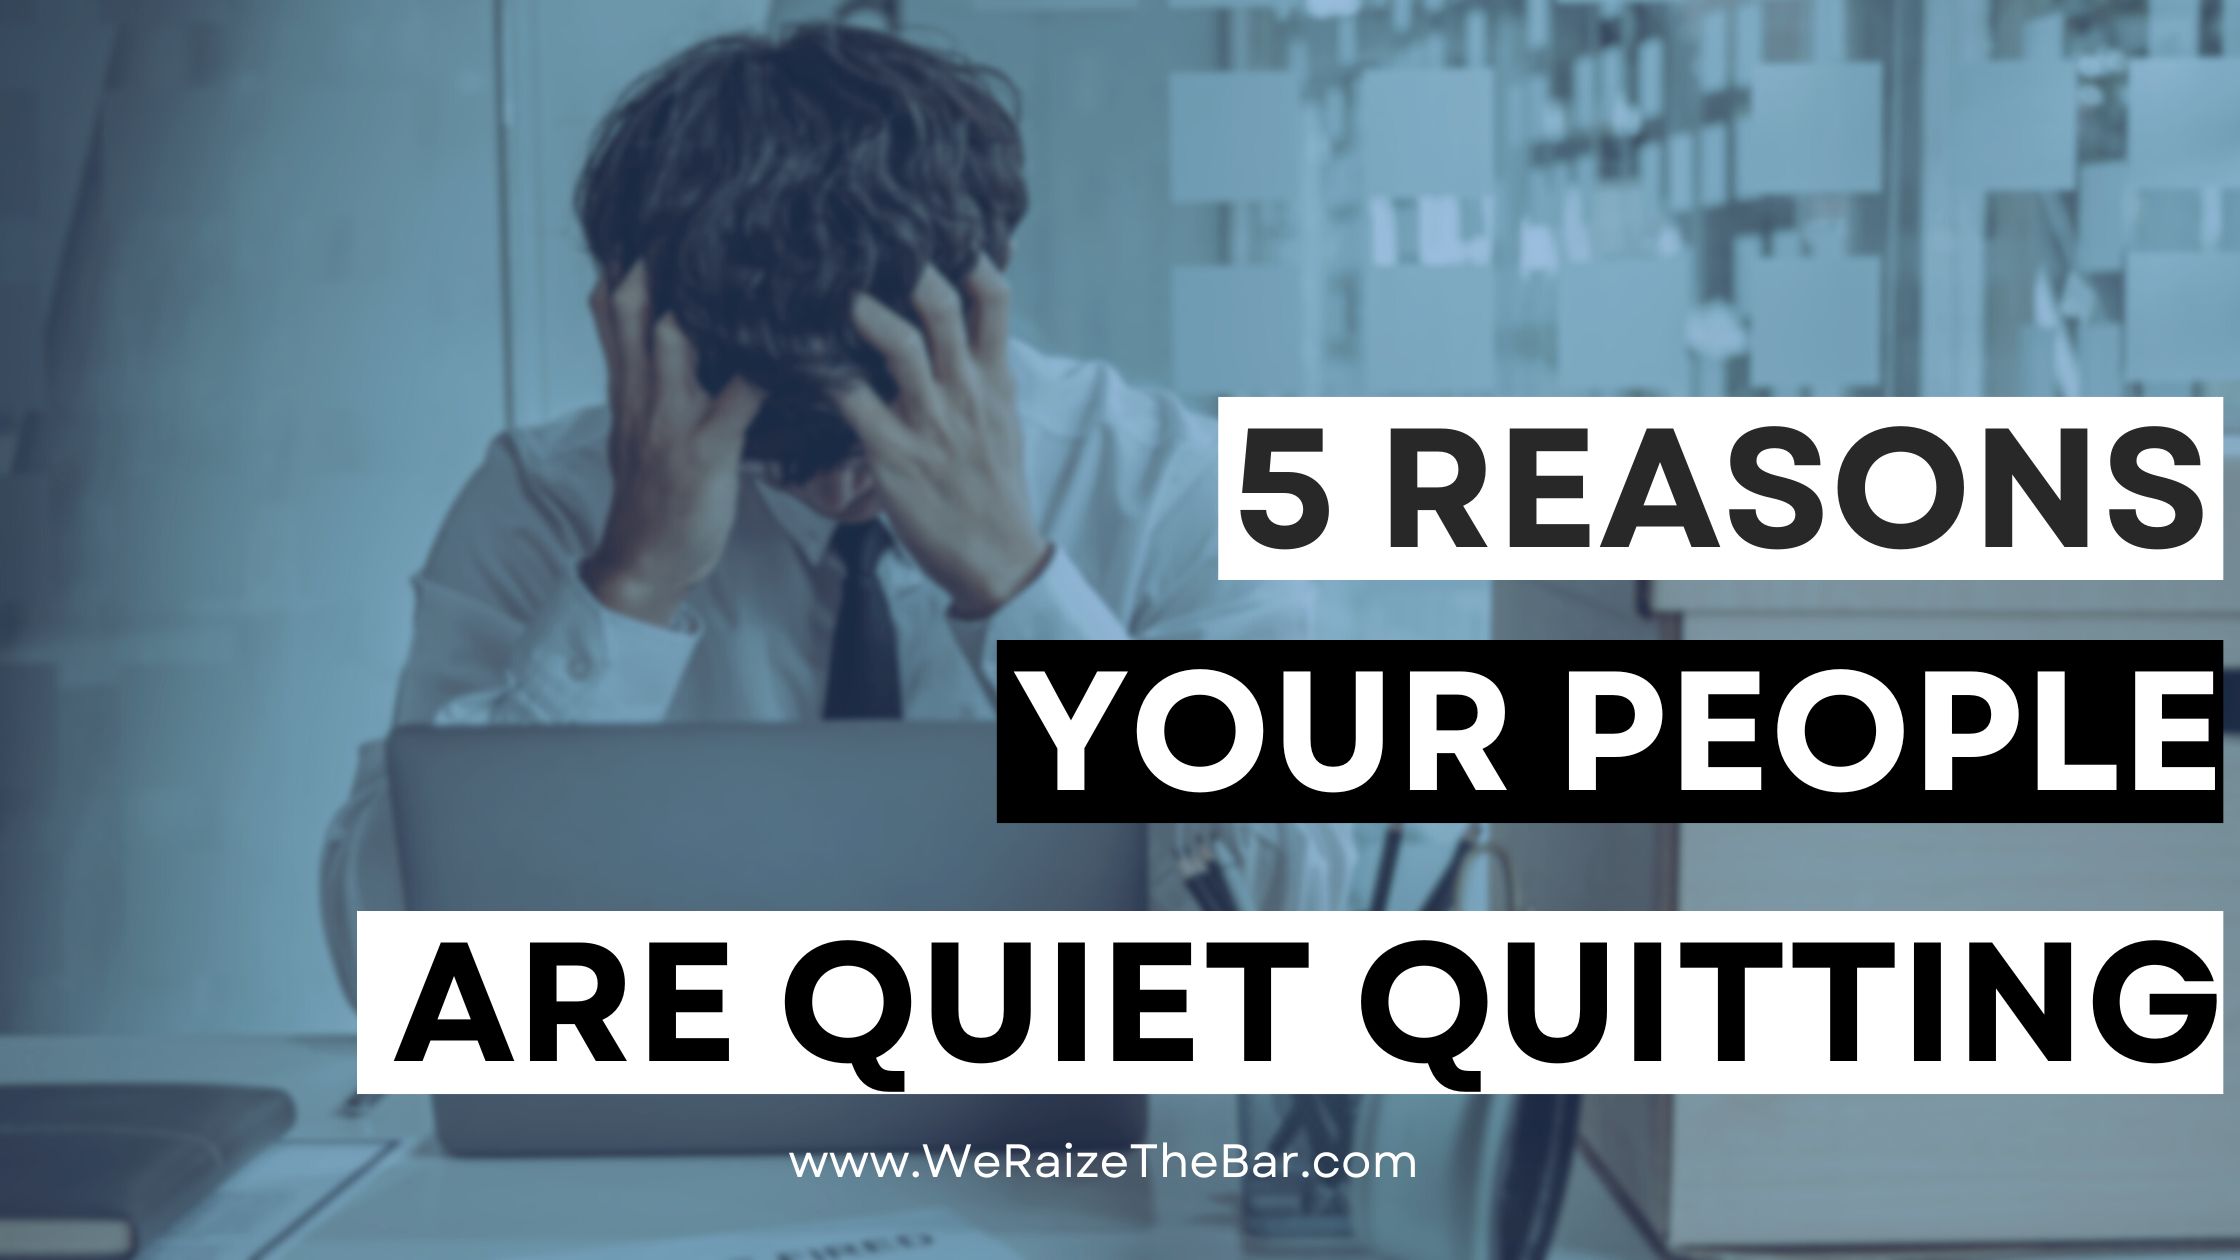 5 Reasons Your People Are Quiet Quitting